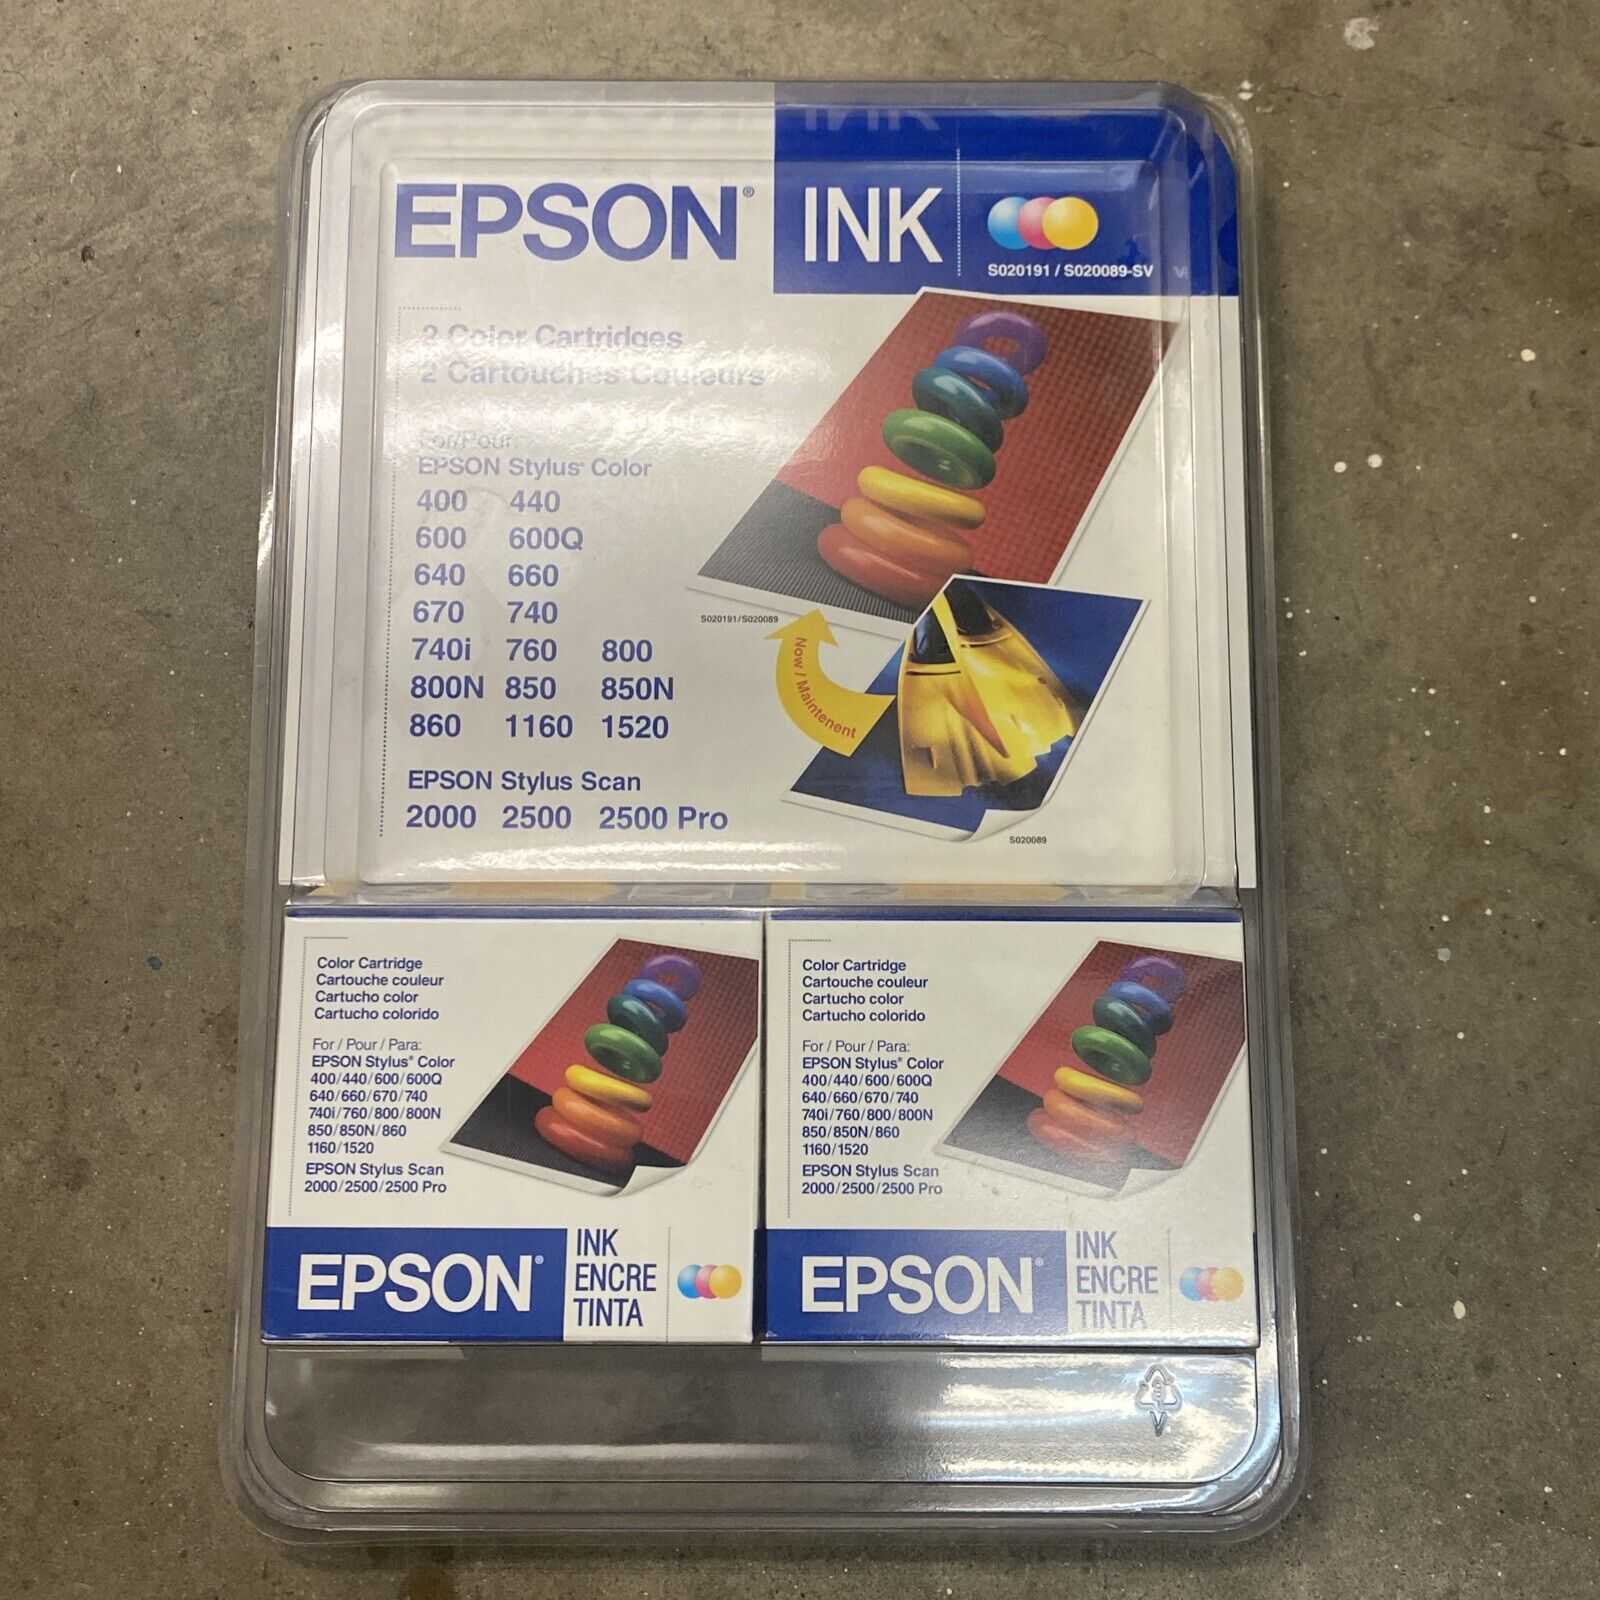 EPSON INK 2 Ink Cartridges Stylus Scan Color S020191 - S020089-SV Exp. 6-2006